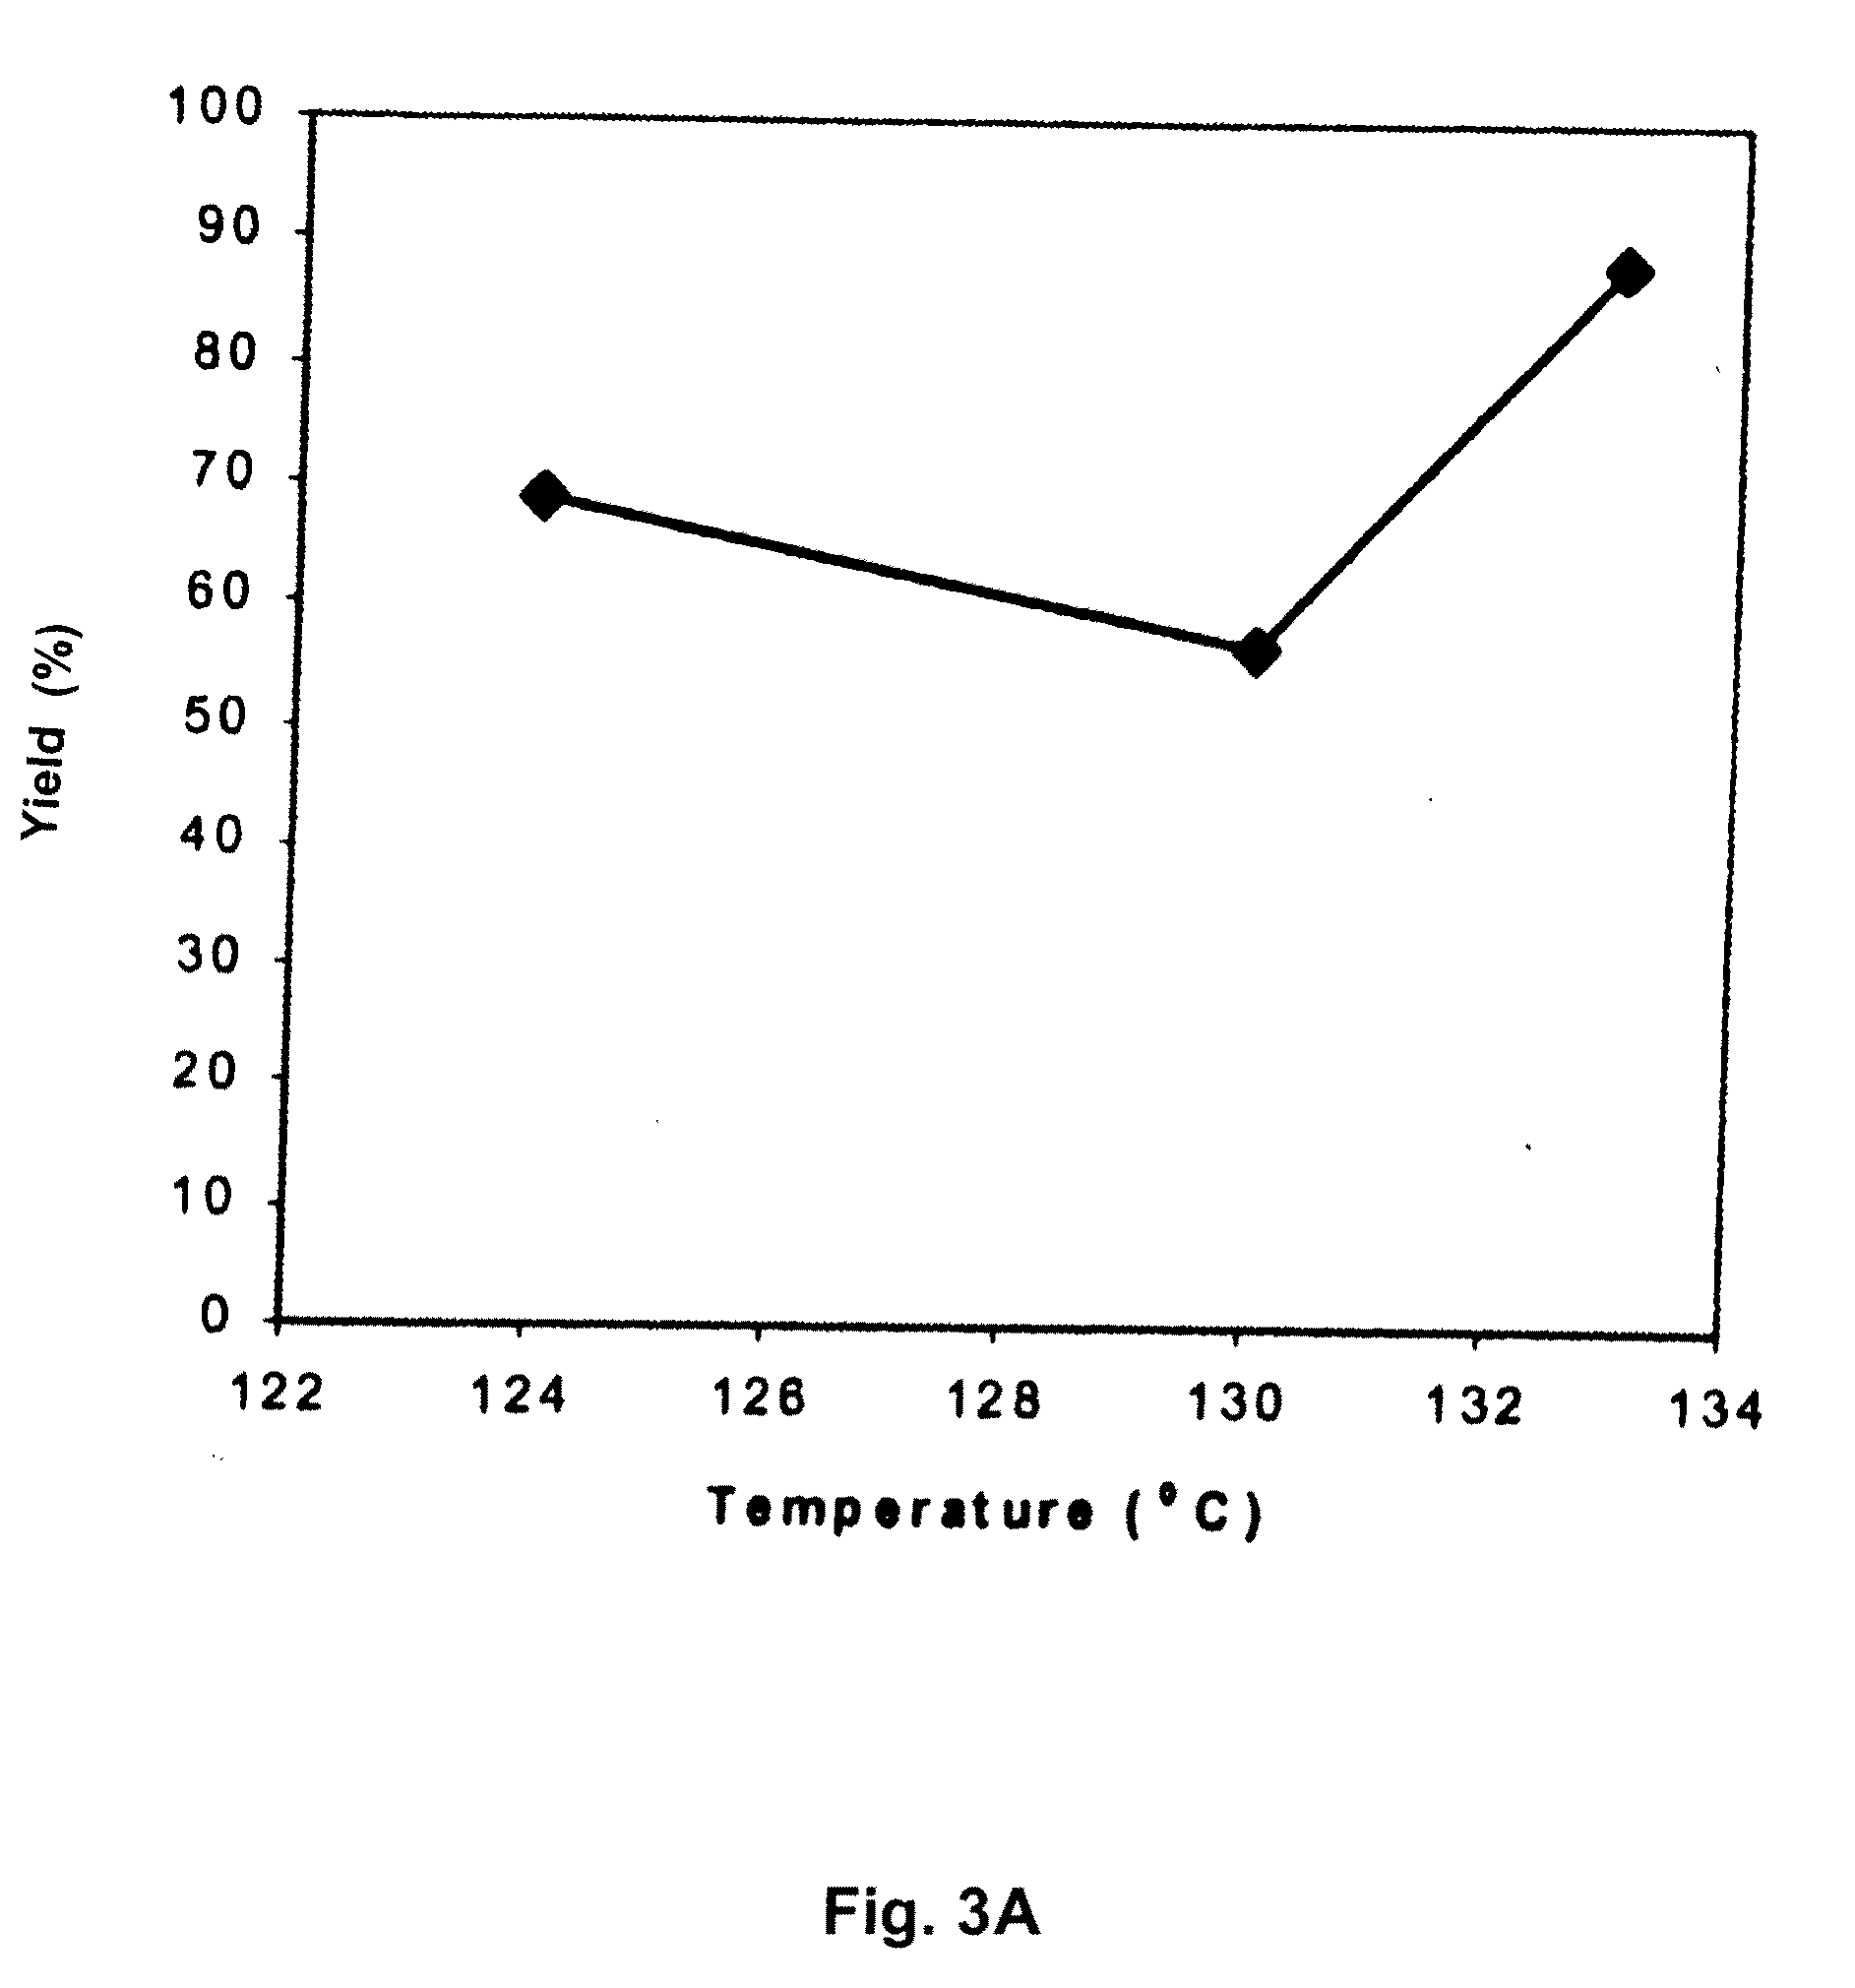 Controlled release composition containing a strontium salt